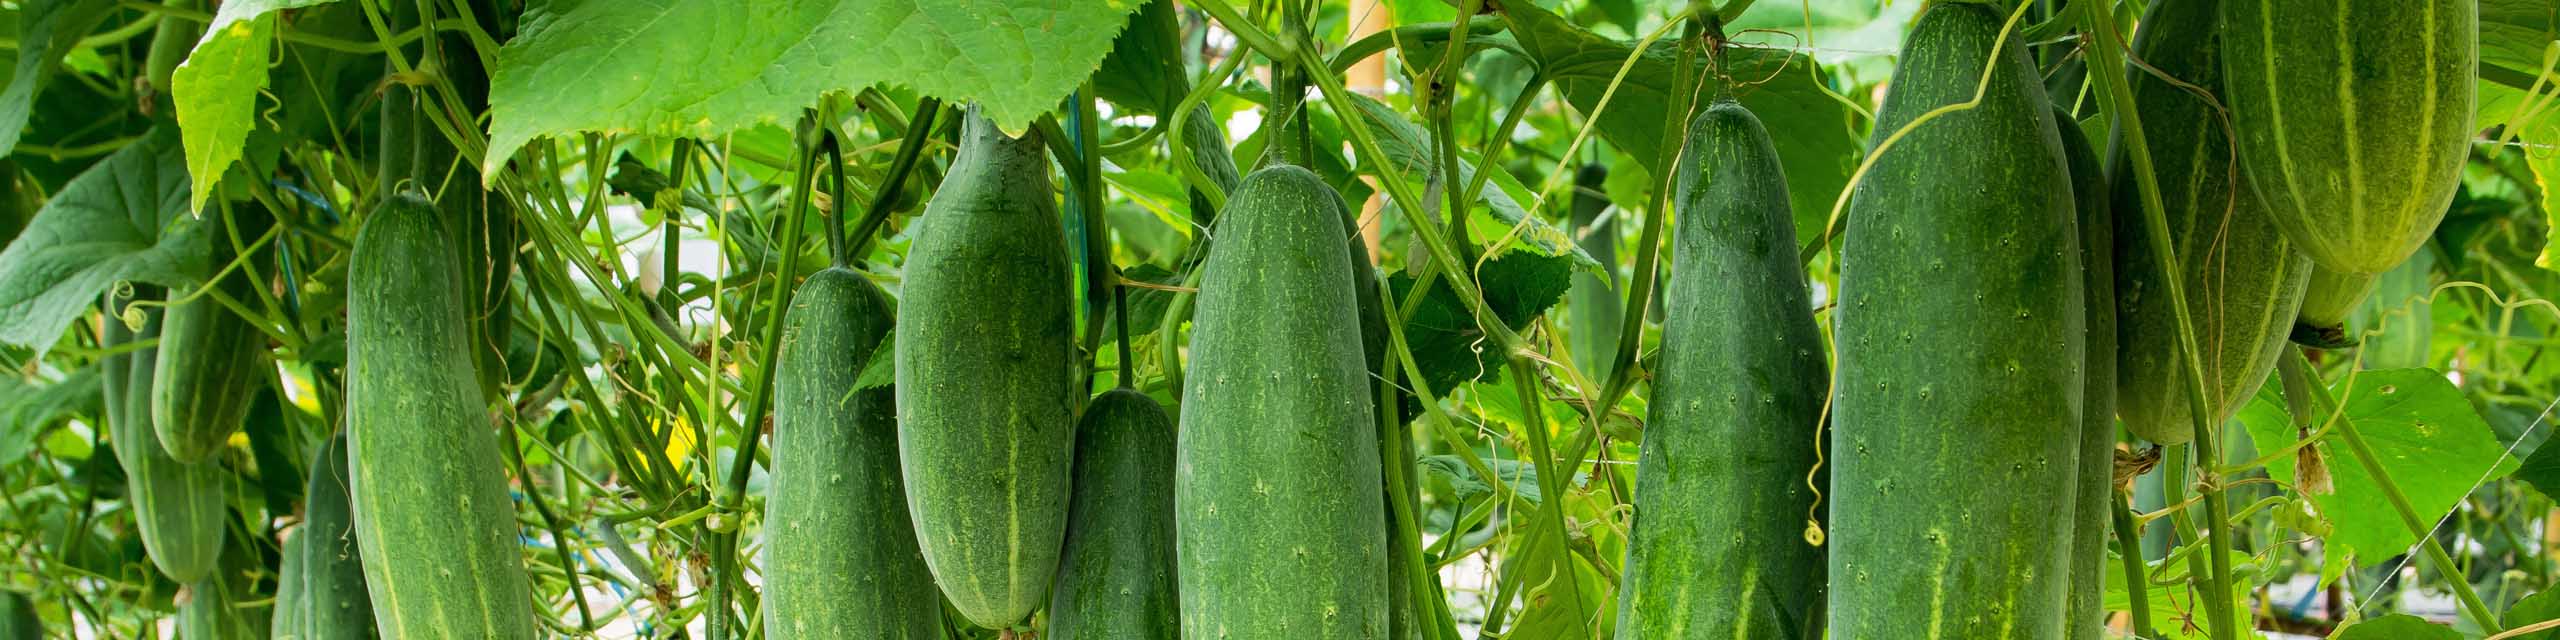 Cucumbers hanging from a vine on a trellis.